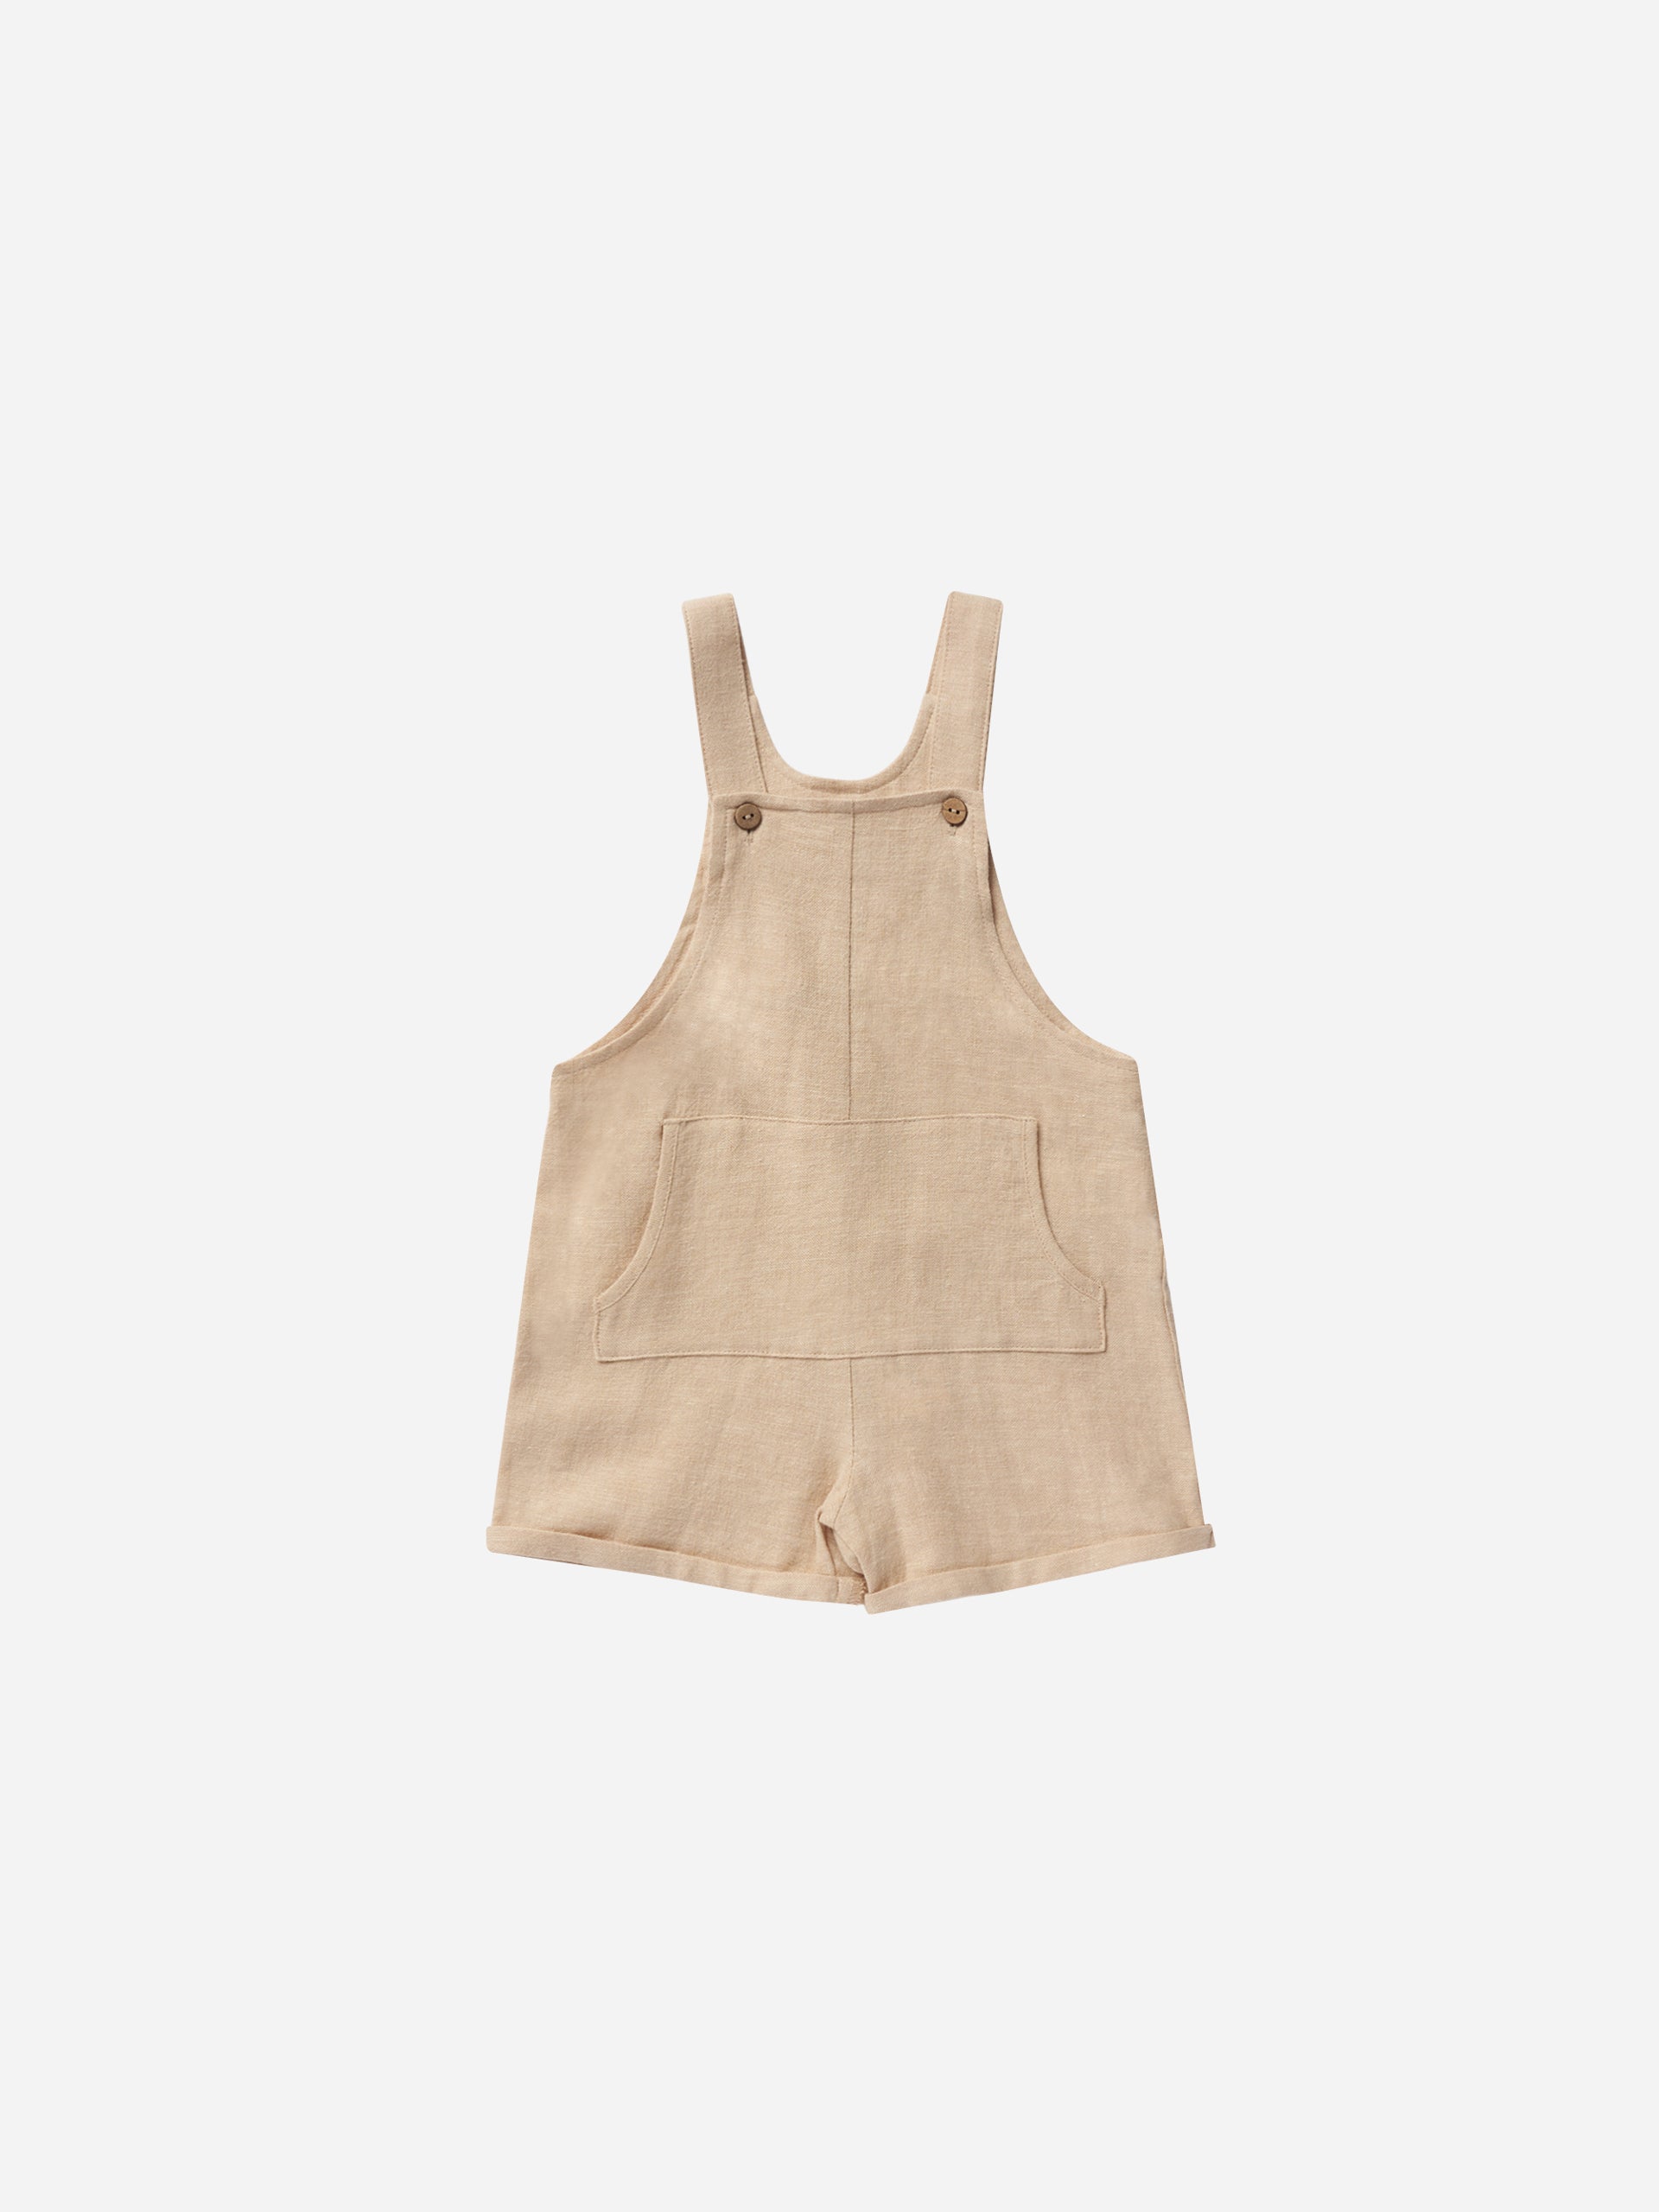 Billie Overalls || Heathered Sand - Rylee + Cru | Kids Clothes | Trendy Baby Clothes | Modern Infant Outfits |